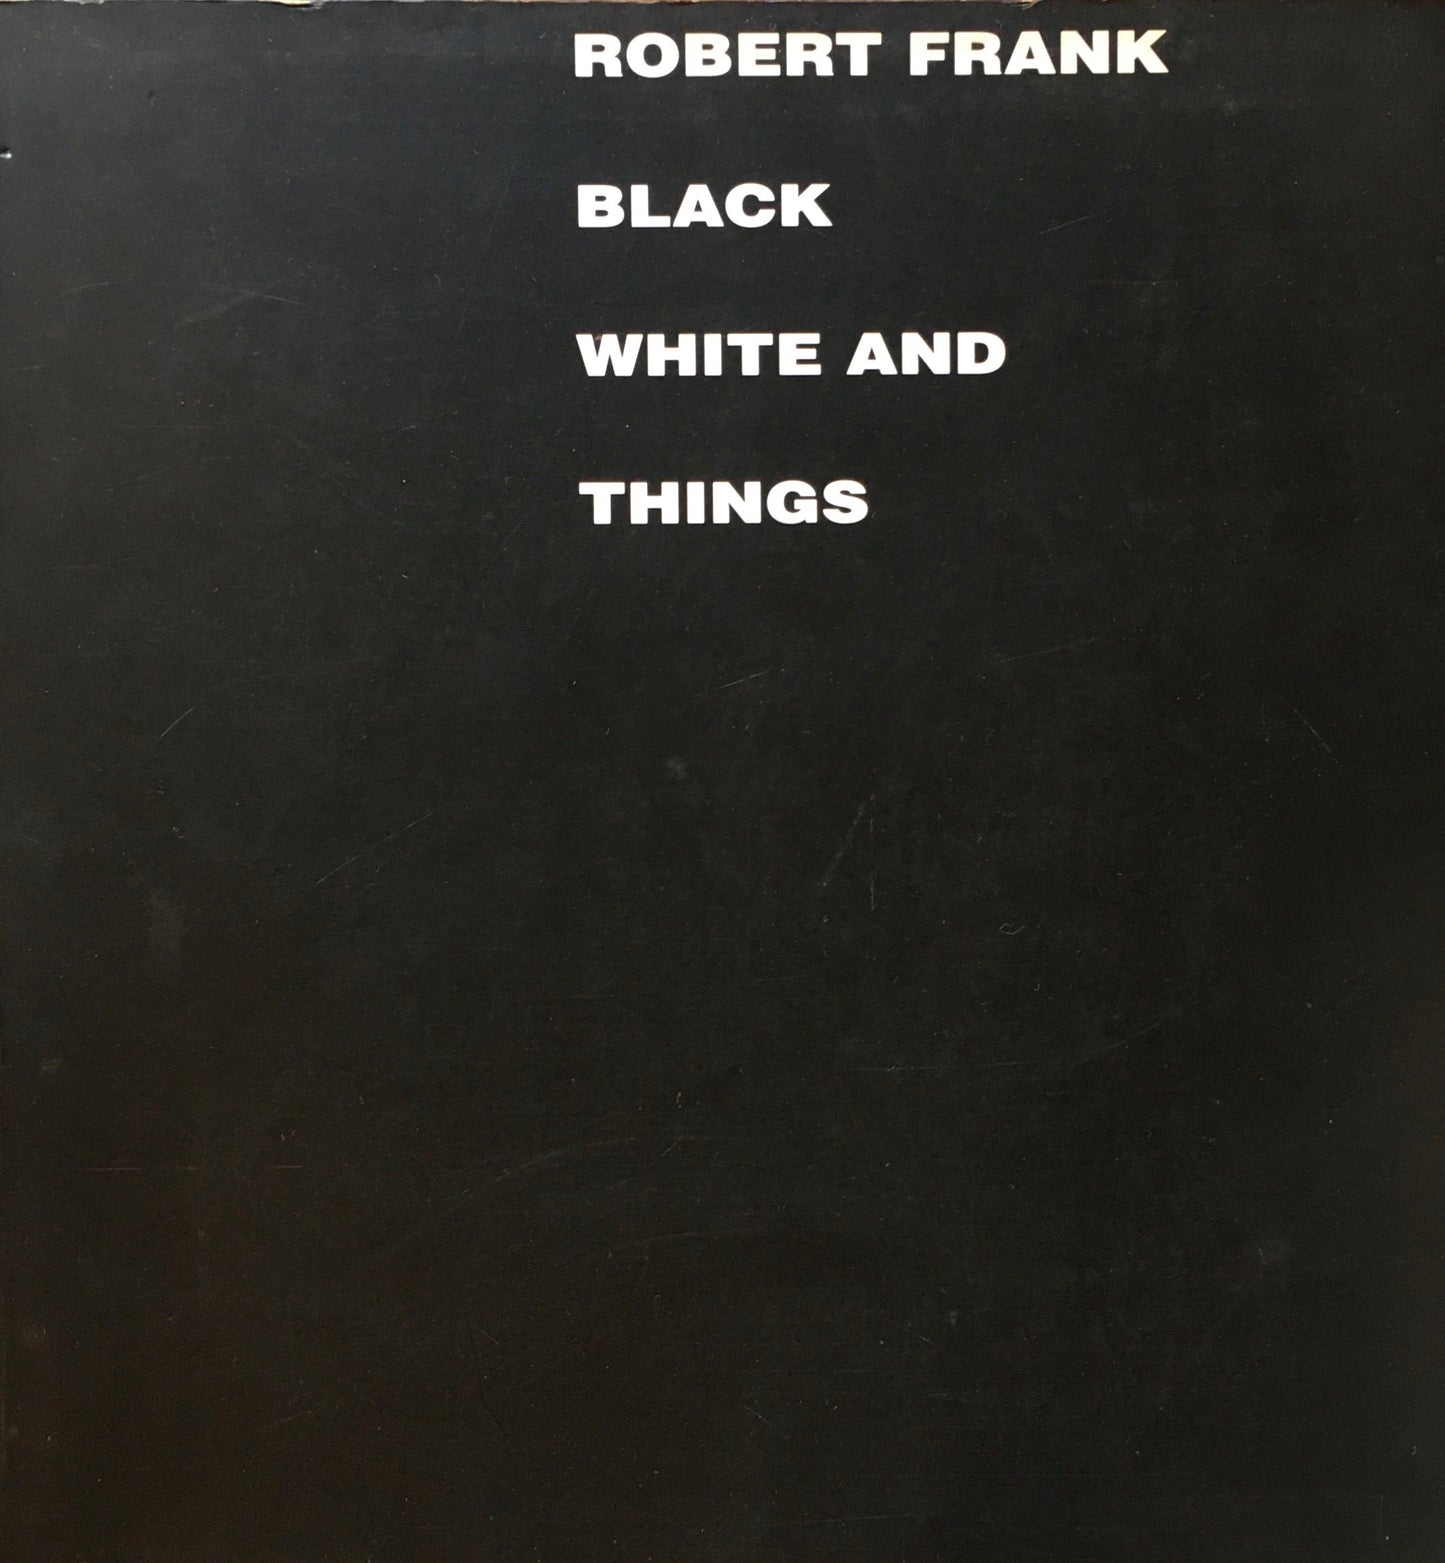 Robert Frank　BLACK WHITE AND THINGS